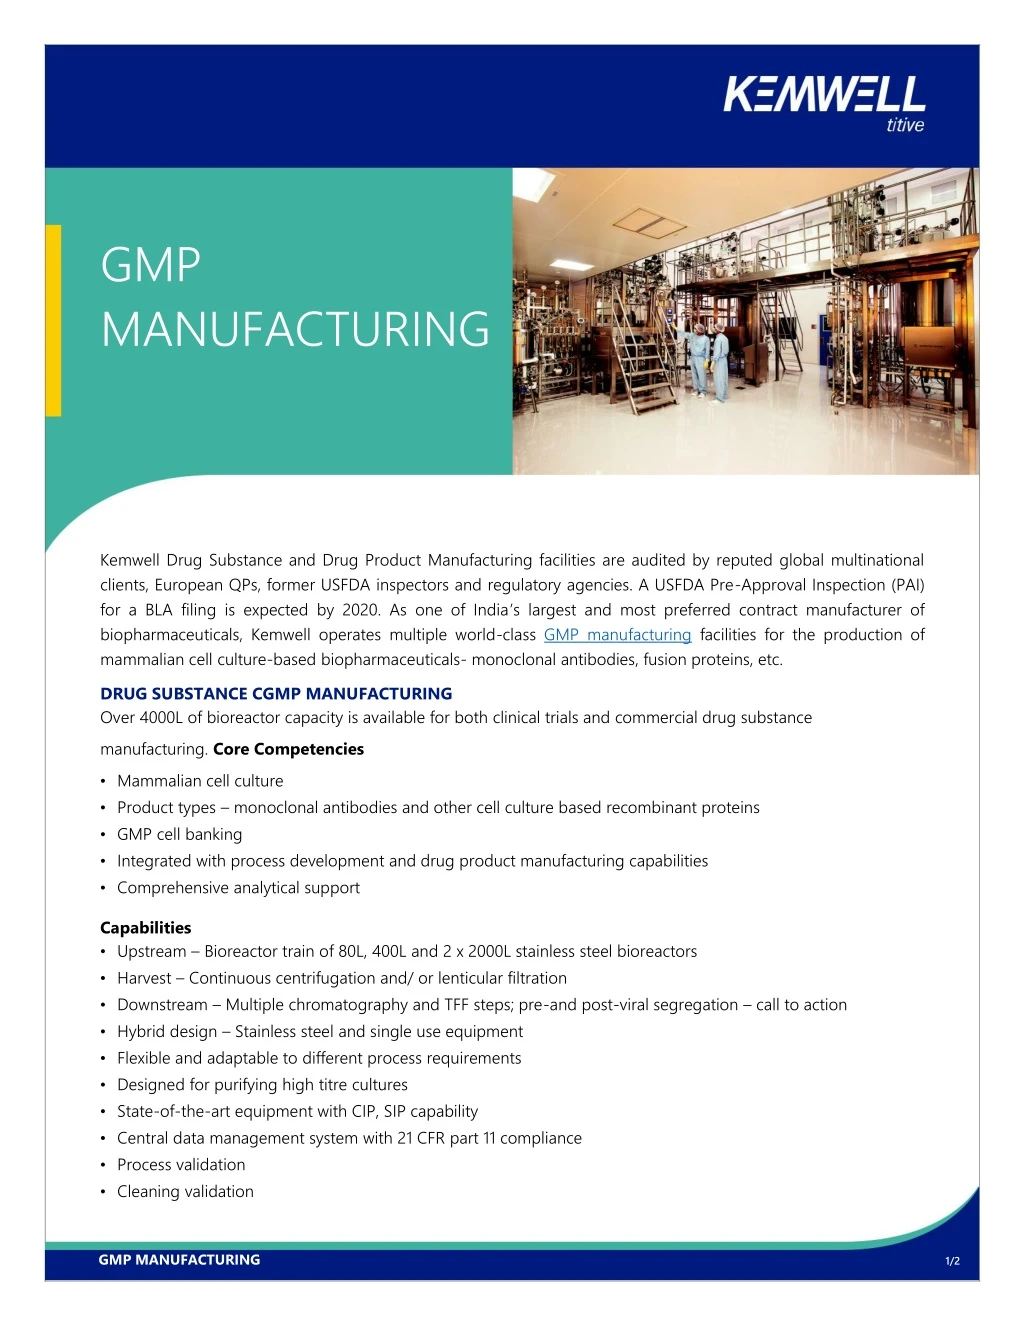 gmp manufacturing kemwell drug substance and drug